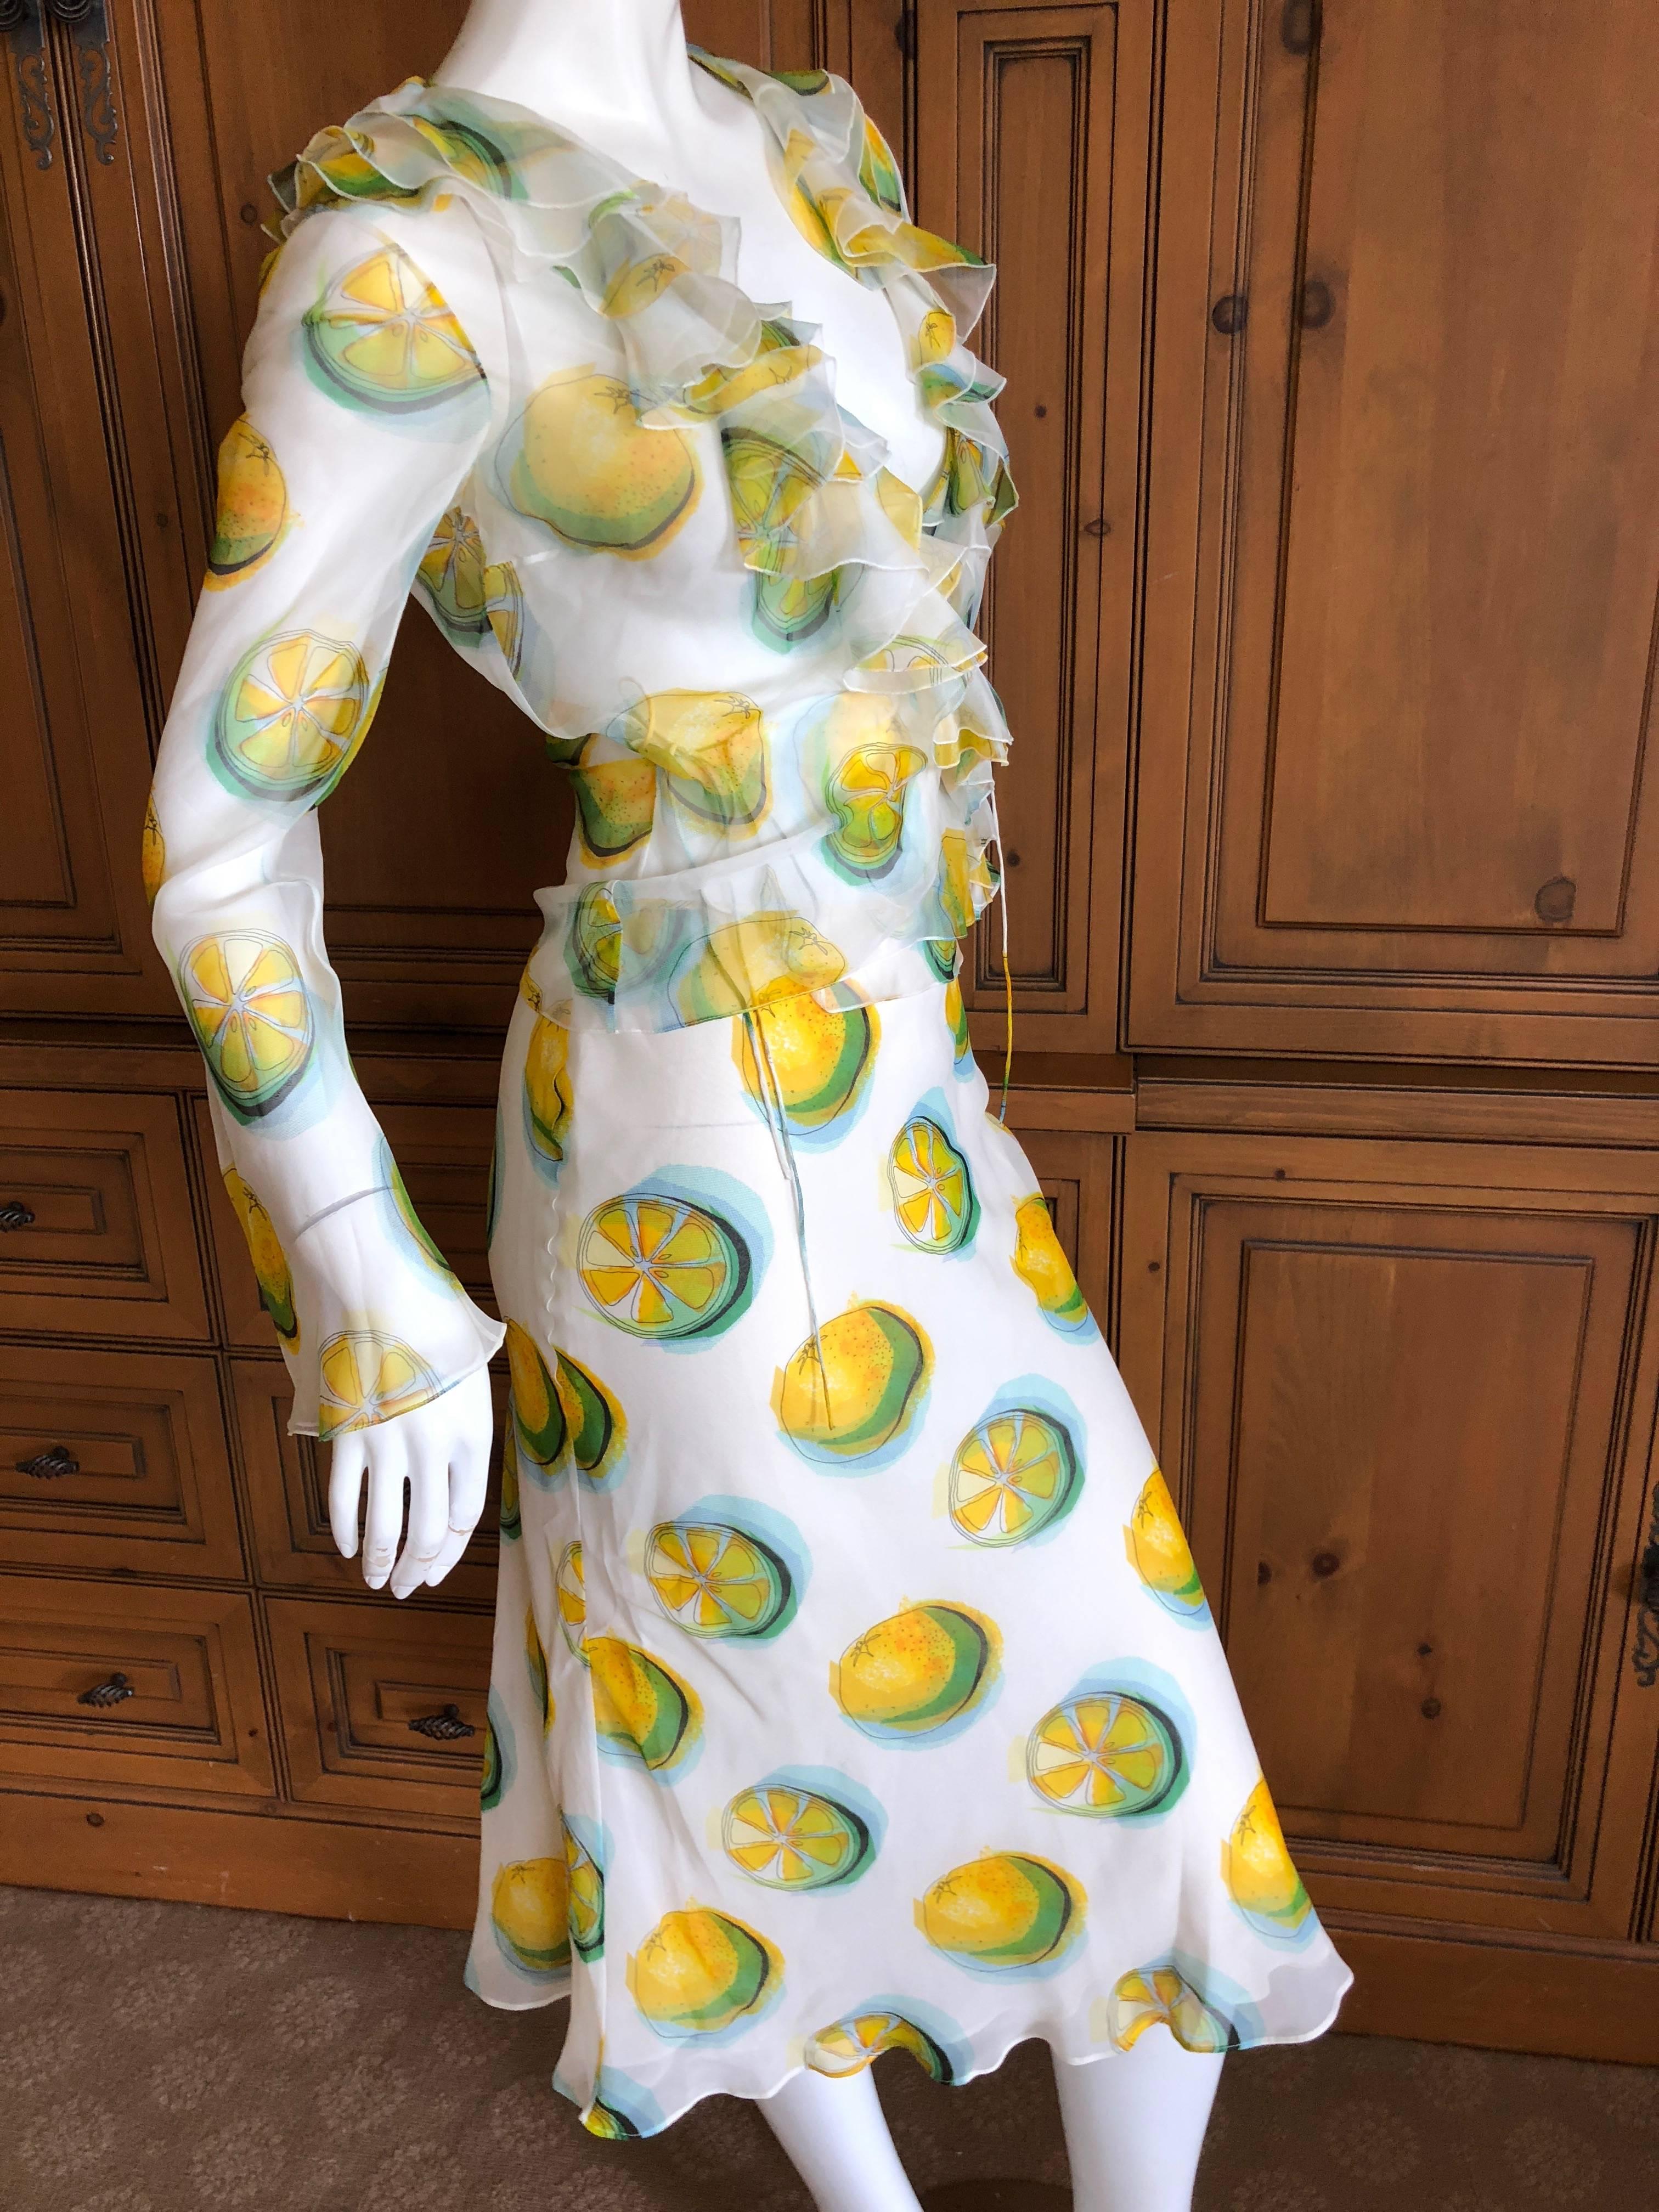 Christian Dior John Galliano Sheer Silk Two Piece Ruffled Low Cut Lemon Dress  In Excellent Condition For Sale In Cloverdale, CA